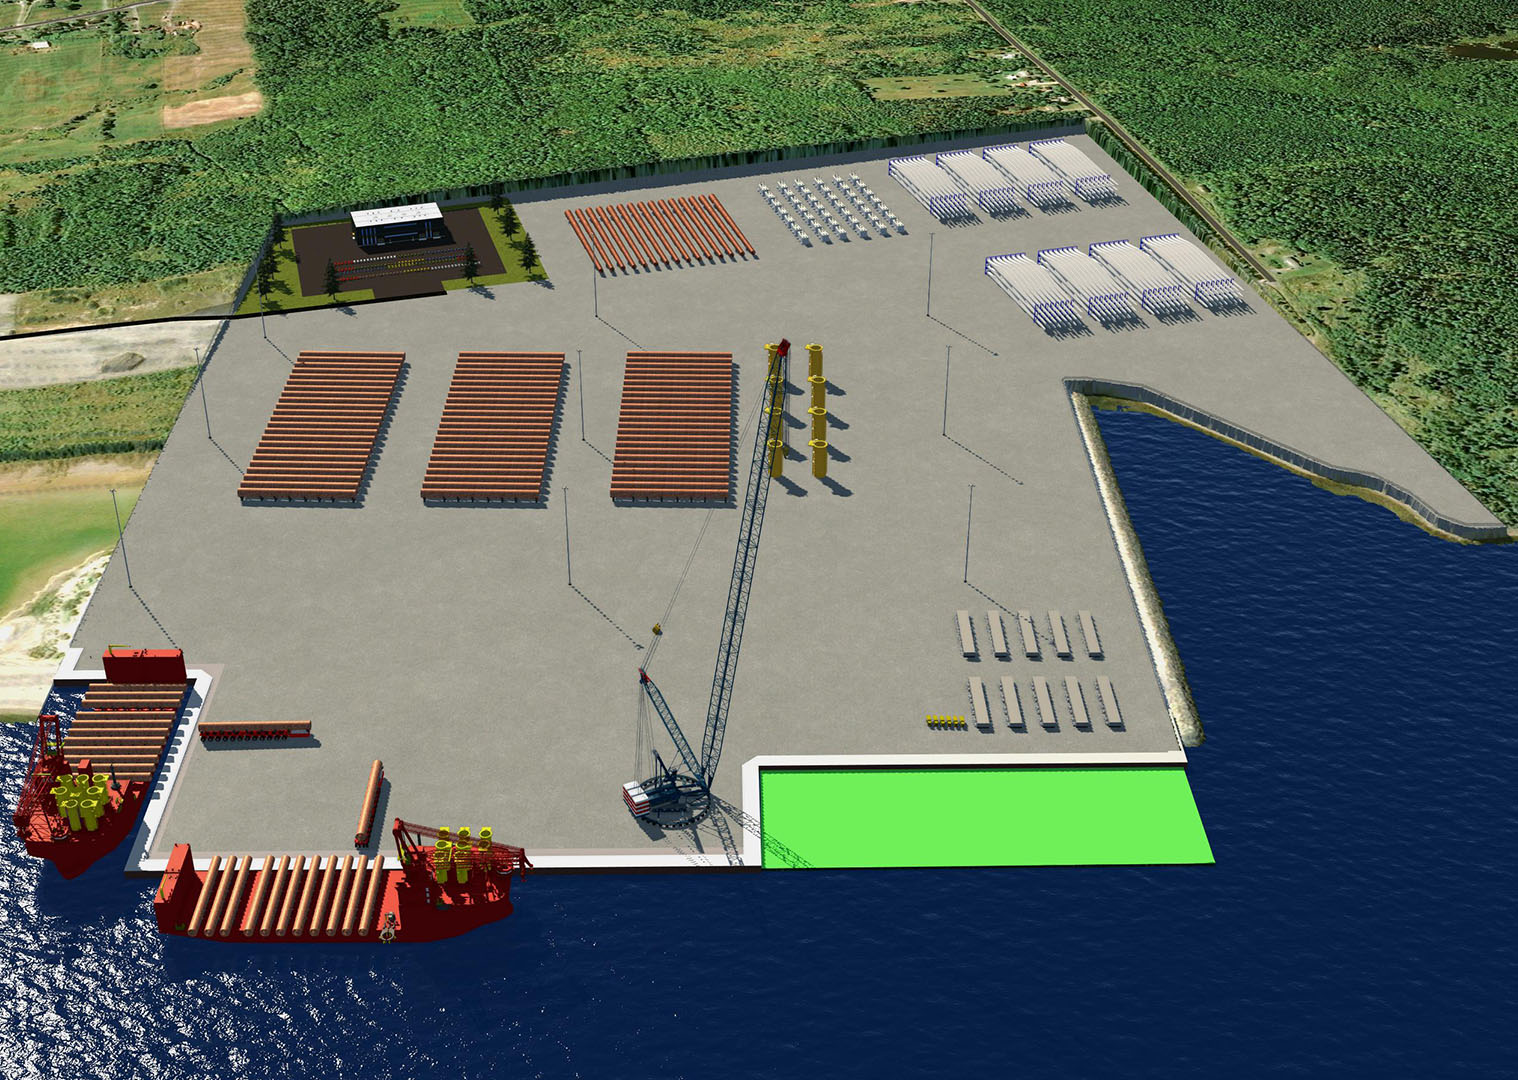 A rendering of the Offshore Wind Marshalling Port